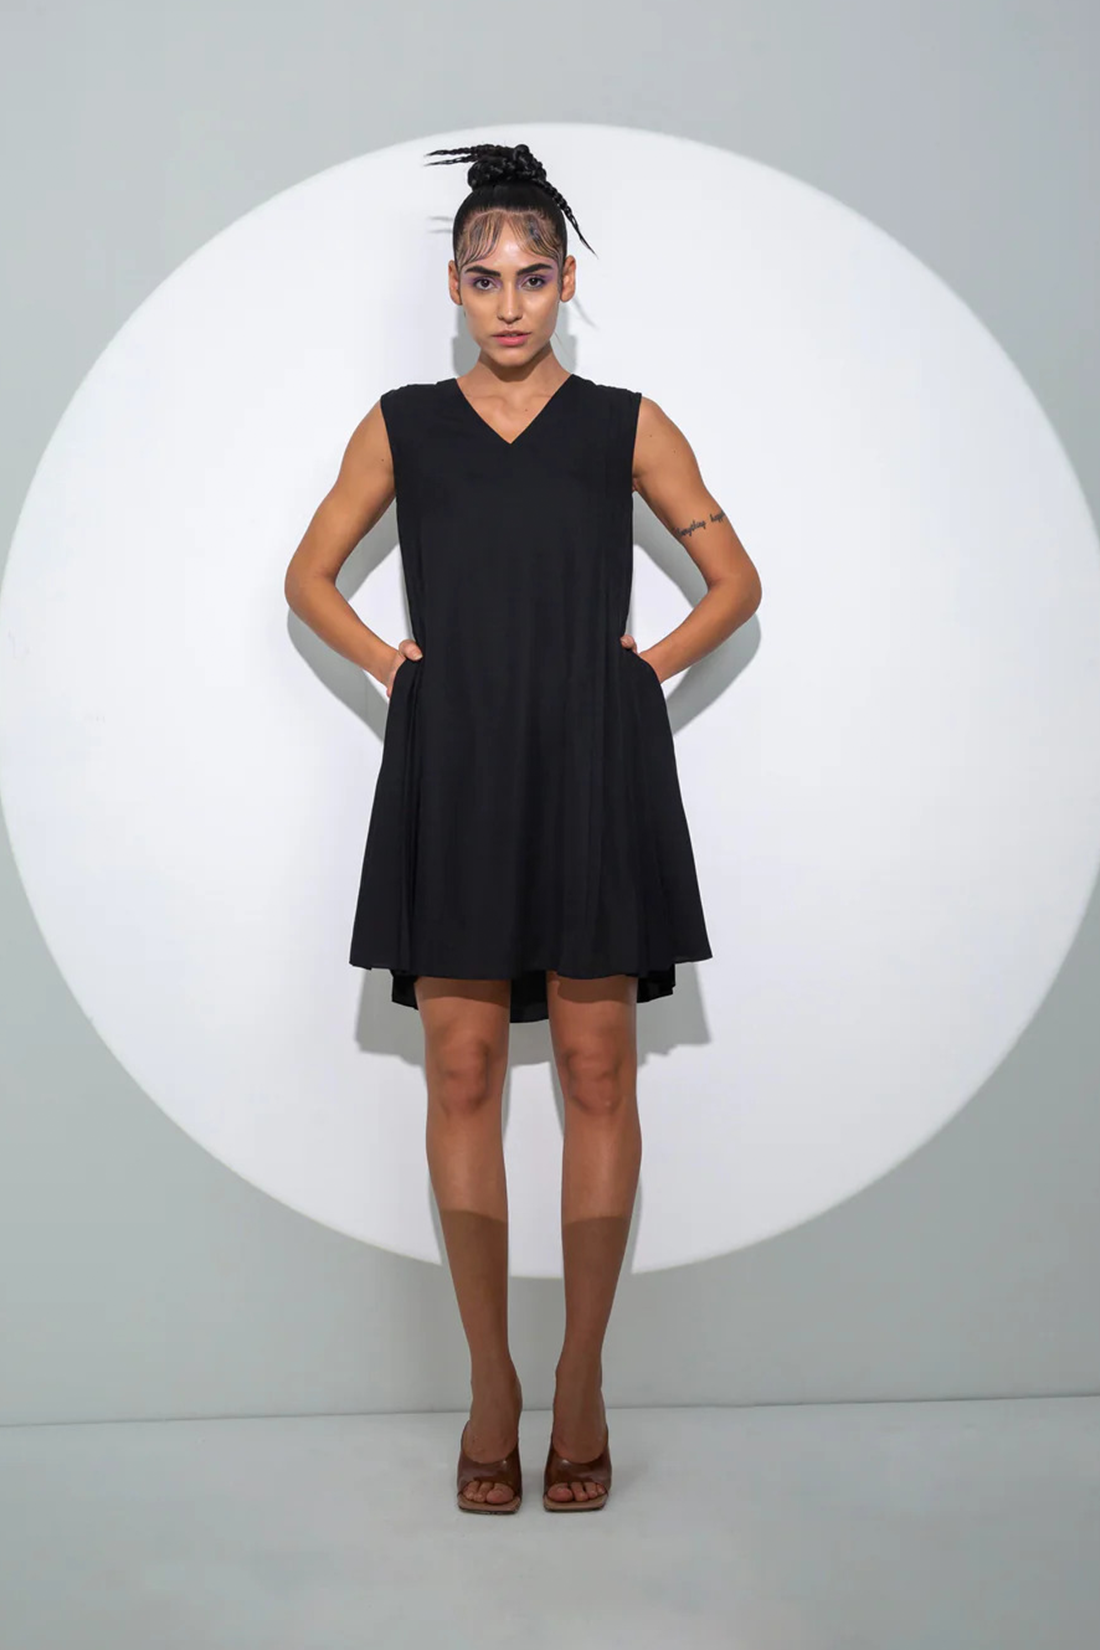 A-line dress with side pleats, a product by Pocketful Of Cherrie